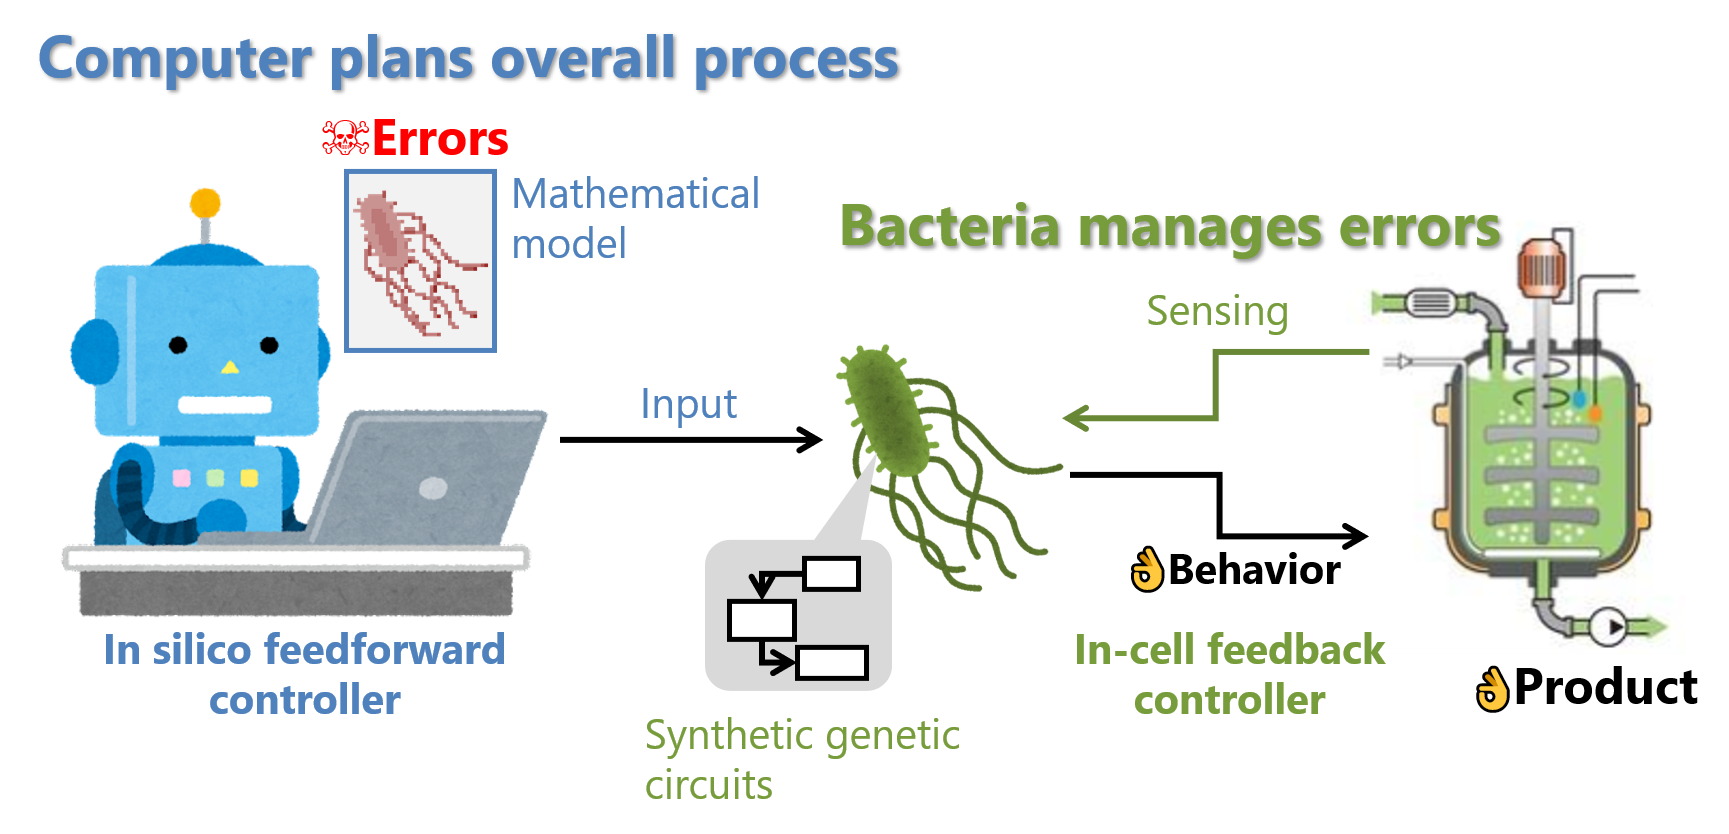 Proof-of-Concept Method Advances Bioprocess Engineering for a Smoother Transition to Biofuels